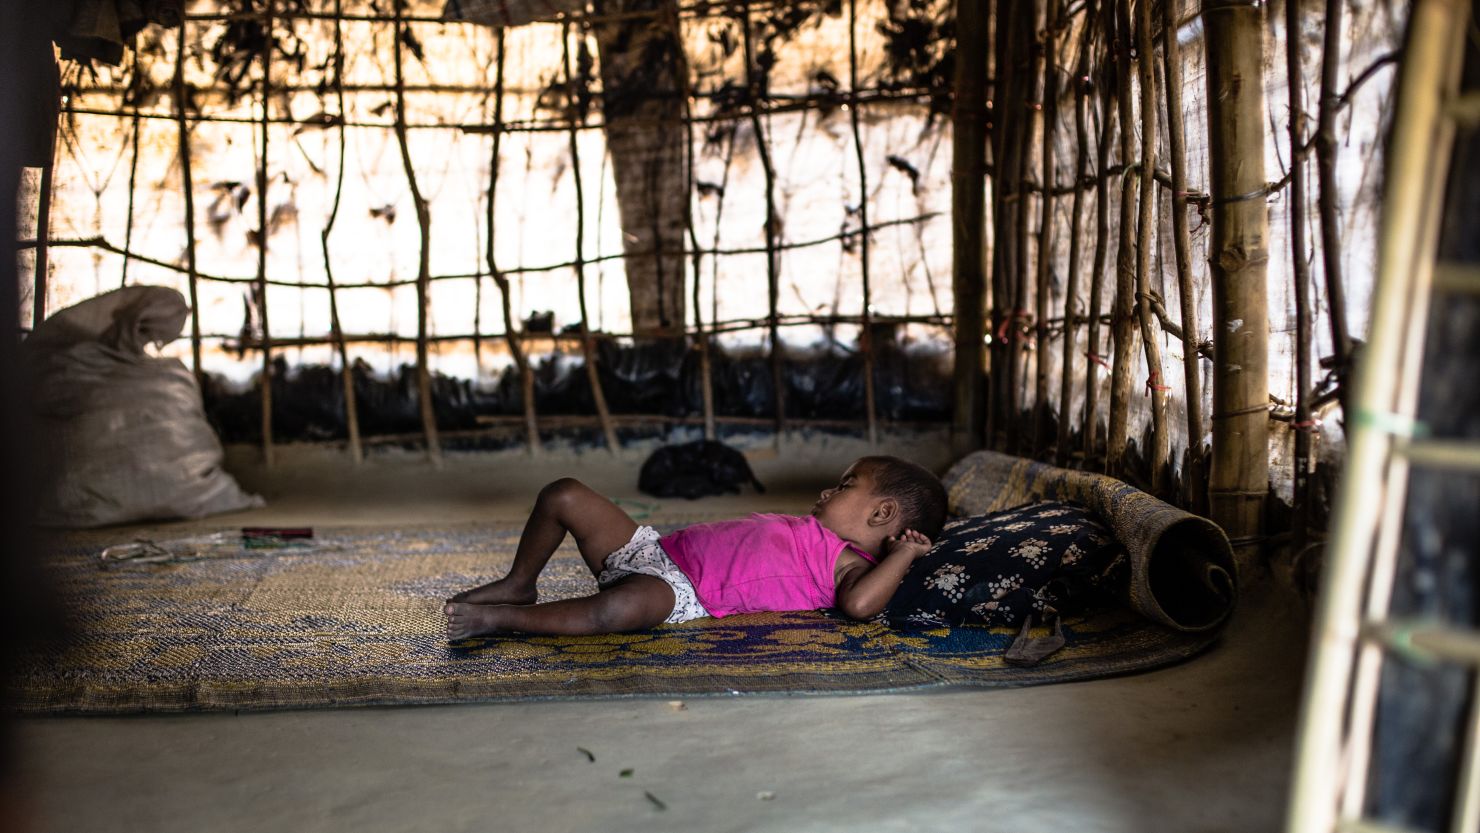 Rabeya's two-year-old daughter sleeps inside their temporary shelter in the makeshift Balukhali camp in Ukhiya, Cox's Bazar district, in south eastern Bangladesh, April 8, 2017. Since October 2016, almost 75,000 people fleeing violence in the northern area of Rakhine State in neighboring Myanmar have arrived in Bangladesh. Many are living in unplanned and overcrowded settlements in the district of Cox's Bazar where living conditions are extremely poor. On 20 March 2017, the International Federation of Red Cross and Red Crescent Societies (IFRC) launched a $3.2 million emergency appeal in support of the Bangladesh Red Crescent Society's efforts to address the most urgent humanitarian needs of the newly arrived migrants. The appeal seeks to ensure that 25,000 of the new arrivals will receive food aid and other emergency relief items, including shelter materials, together with clean water, sanitation, psychosocial support and health care over a nine-month period. Photo: Mirva Helenius / IFRC